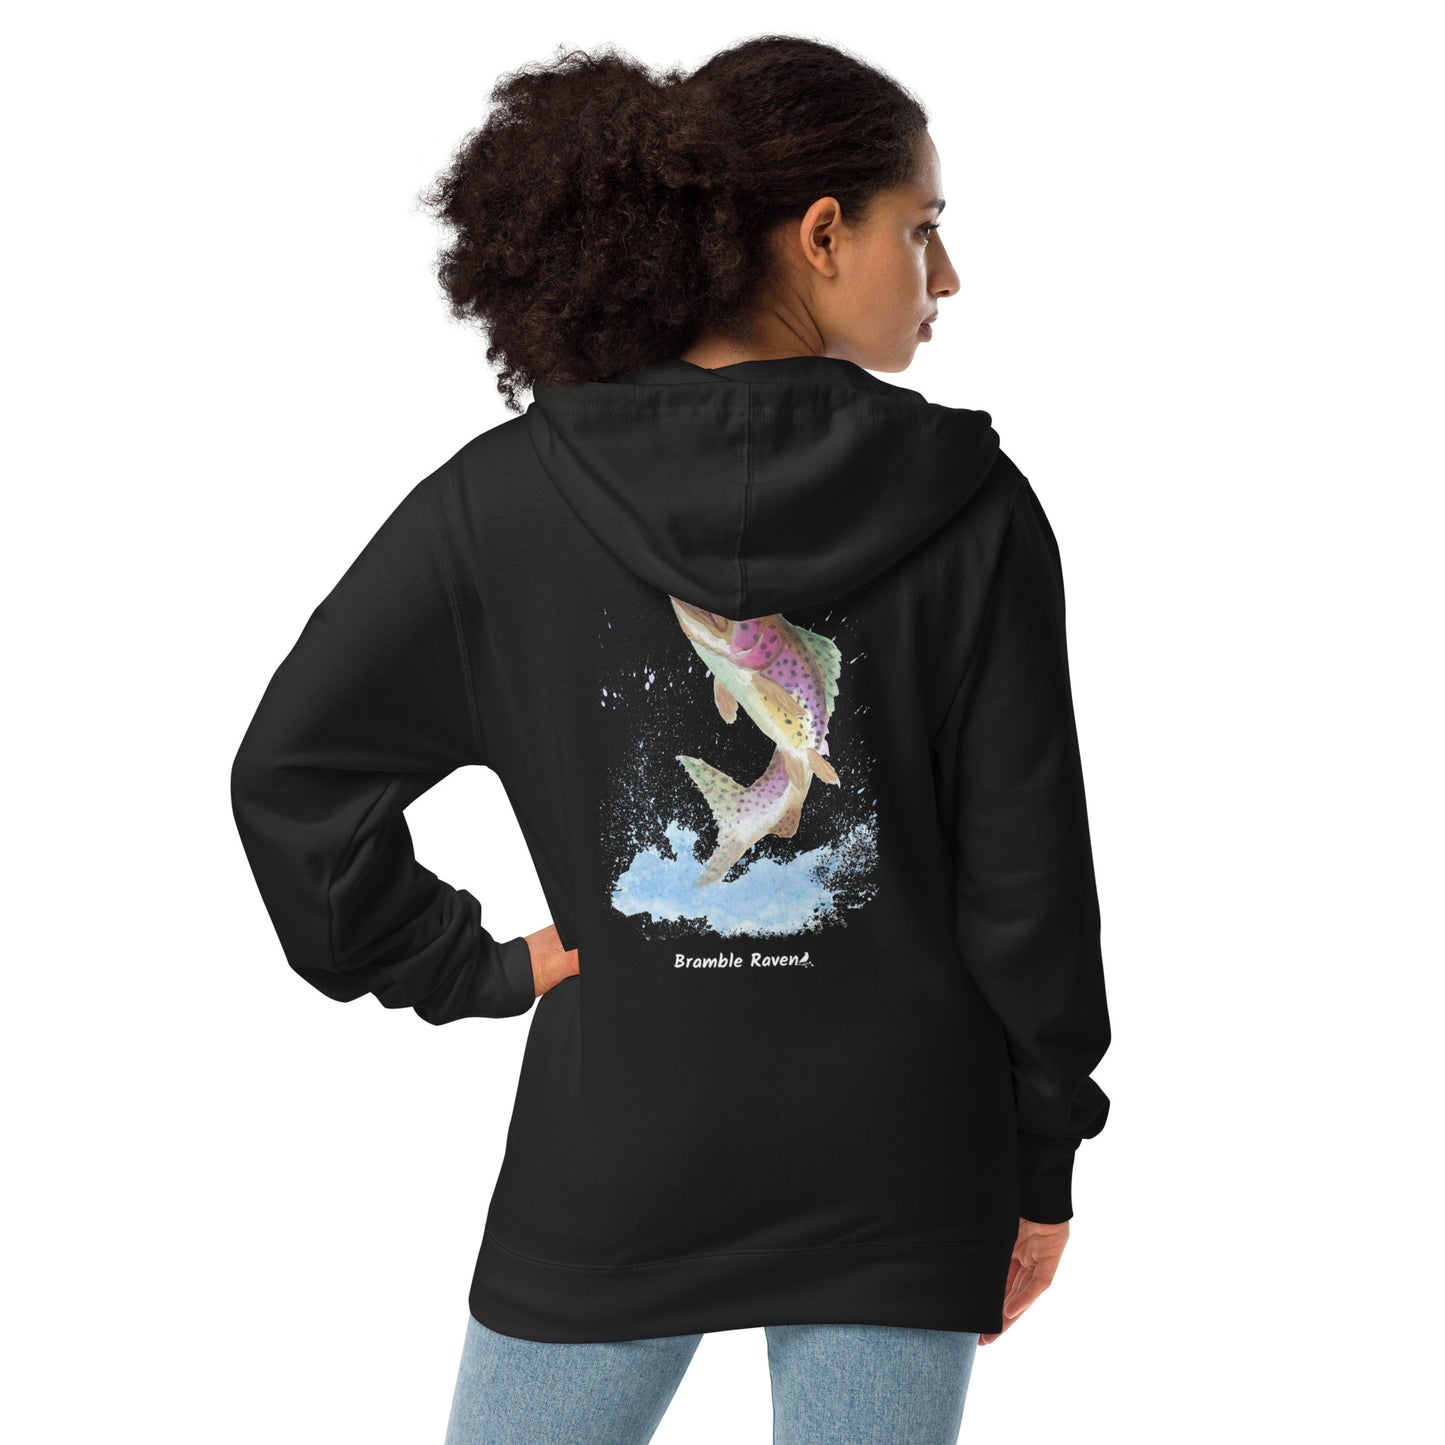 Unisex black colored fleece-lined zip-up hoodie. Features original watercolor painting of a rainbow trout leaping from the water on the back of the hoodie. Shown on a female model.